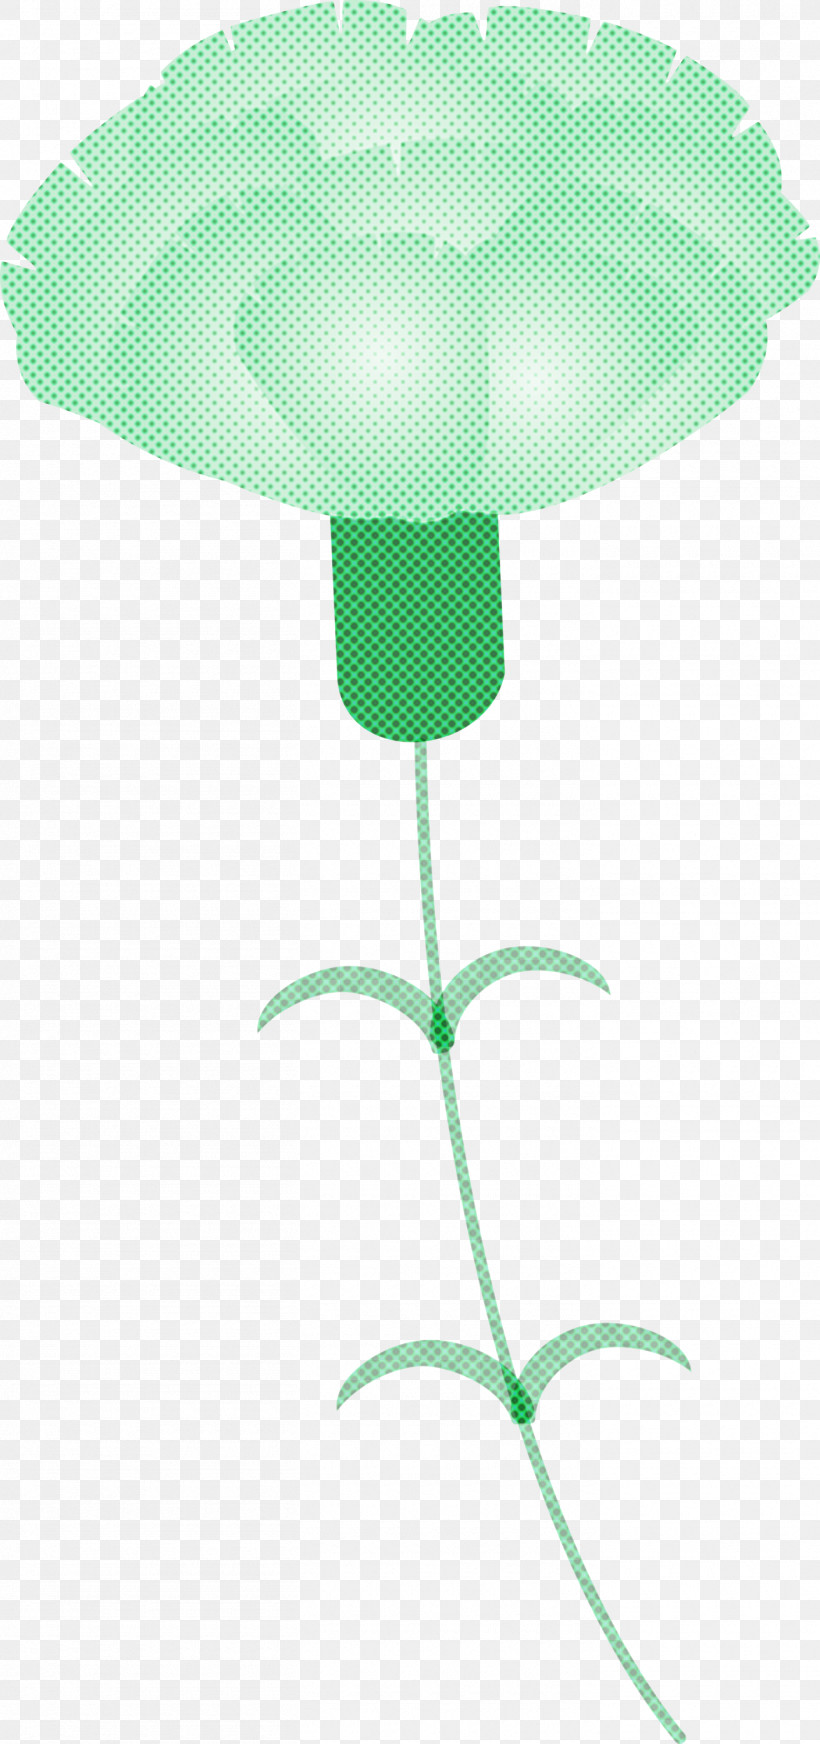 Mothers Day Carnation Mothers Day Flower, PNG, 1410x3000px, Mothers Day Carnation, Green, Mothers Day Flower, Plant Download Free